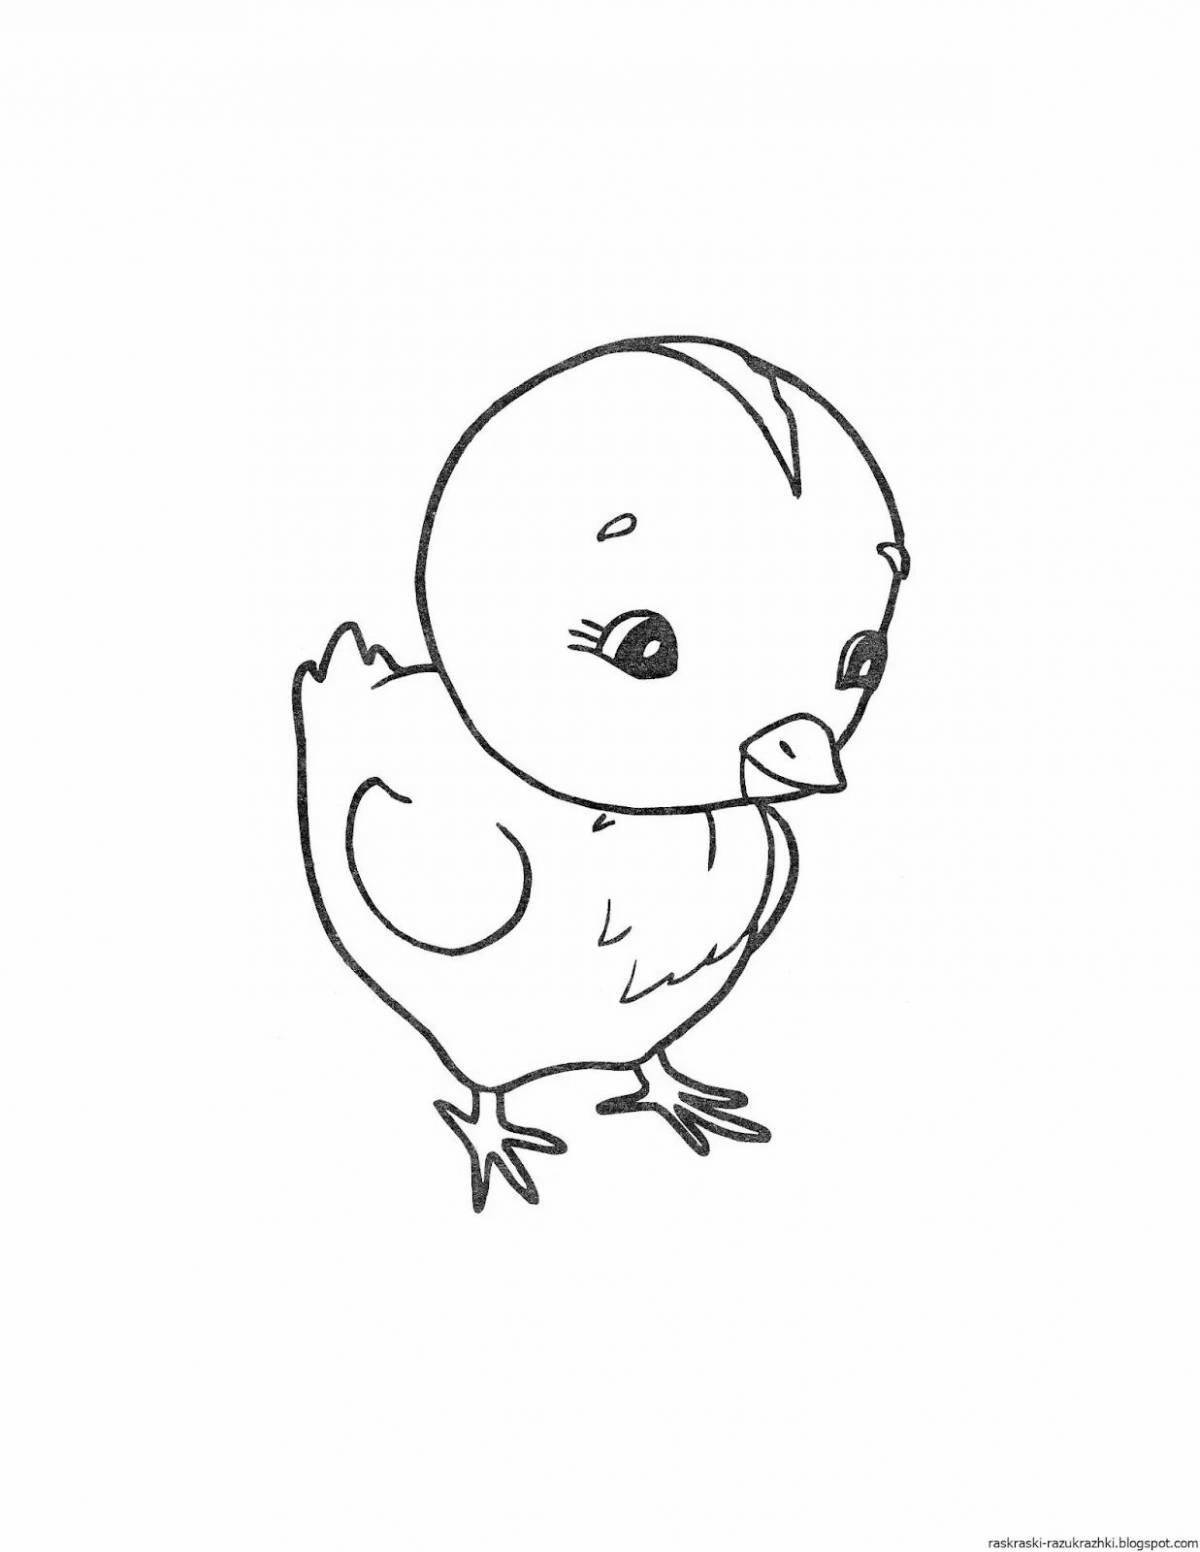 Soft coloring baby chick